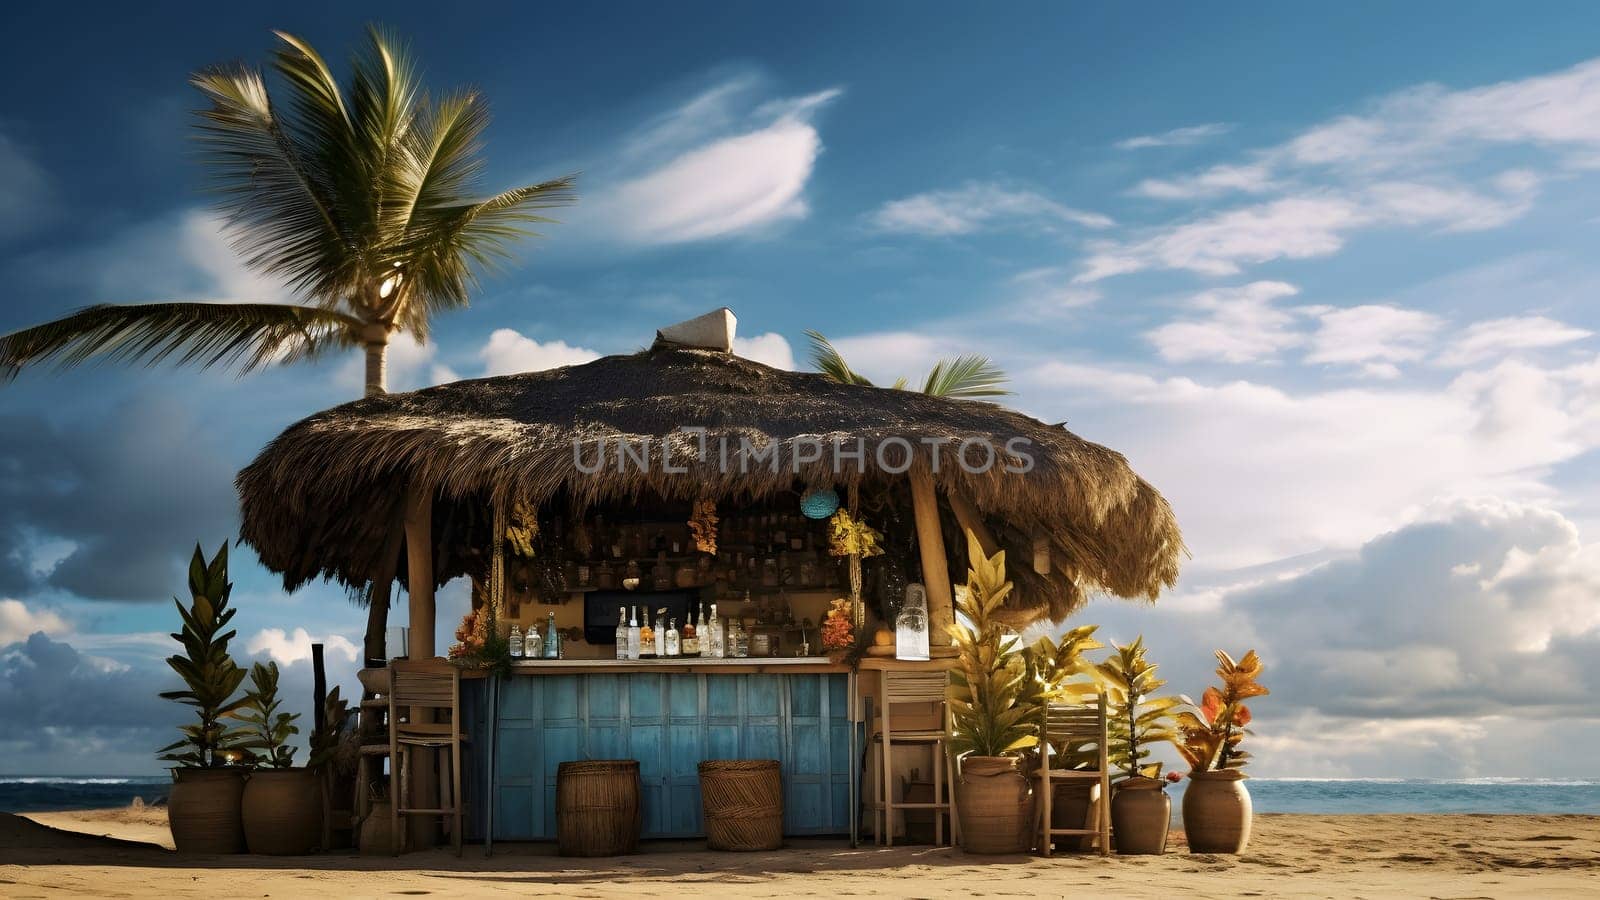 tiki bar on the beach with a palm tree and a blue sky with clouds in the background, neural network generated image by z1b